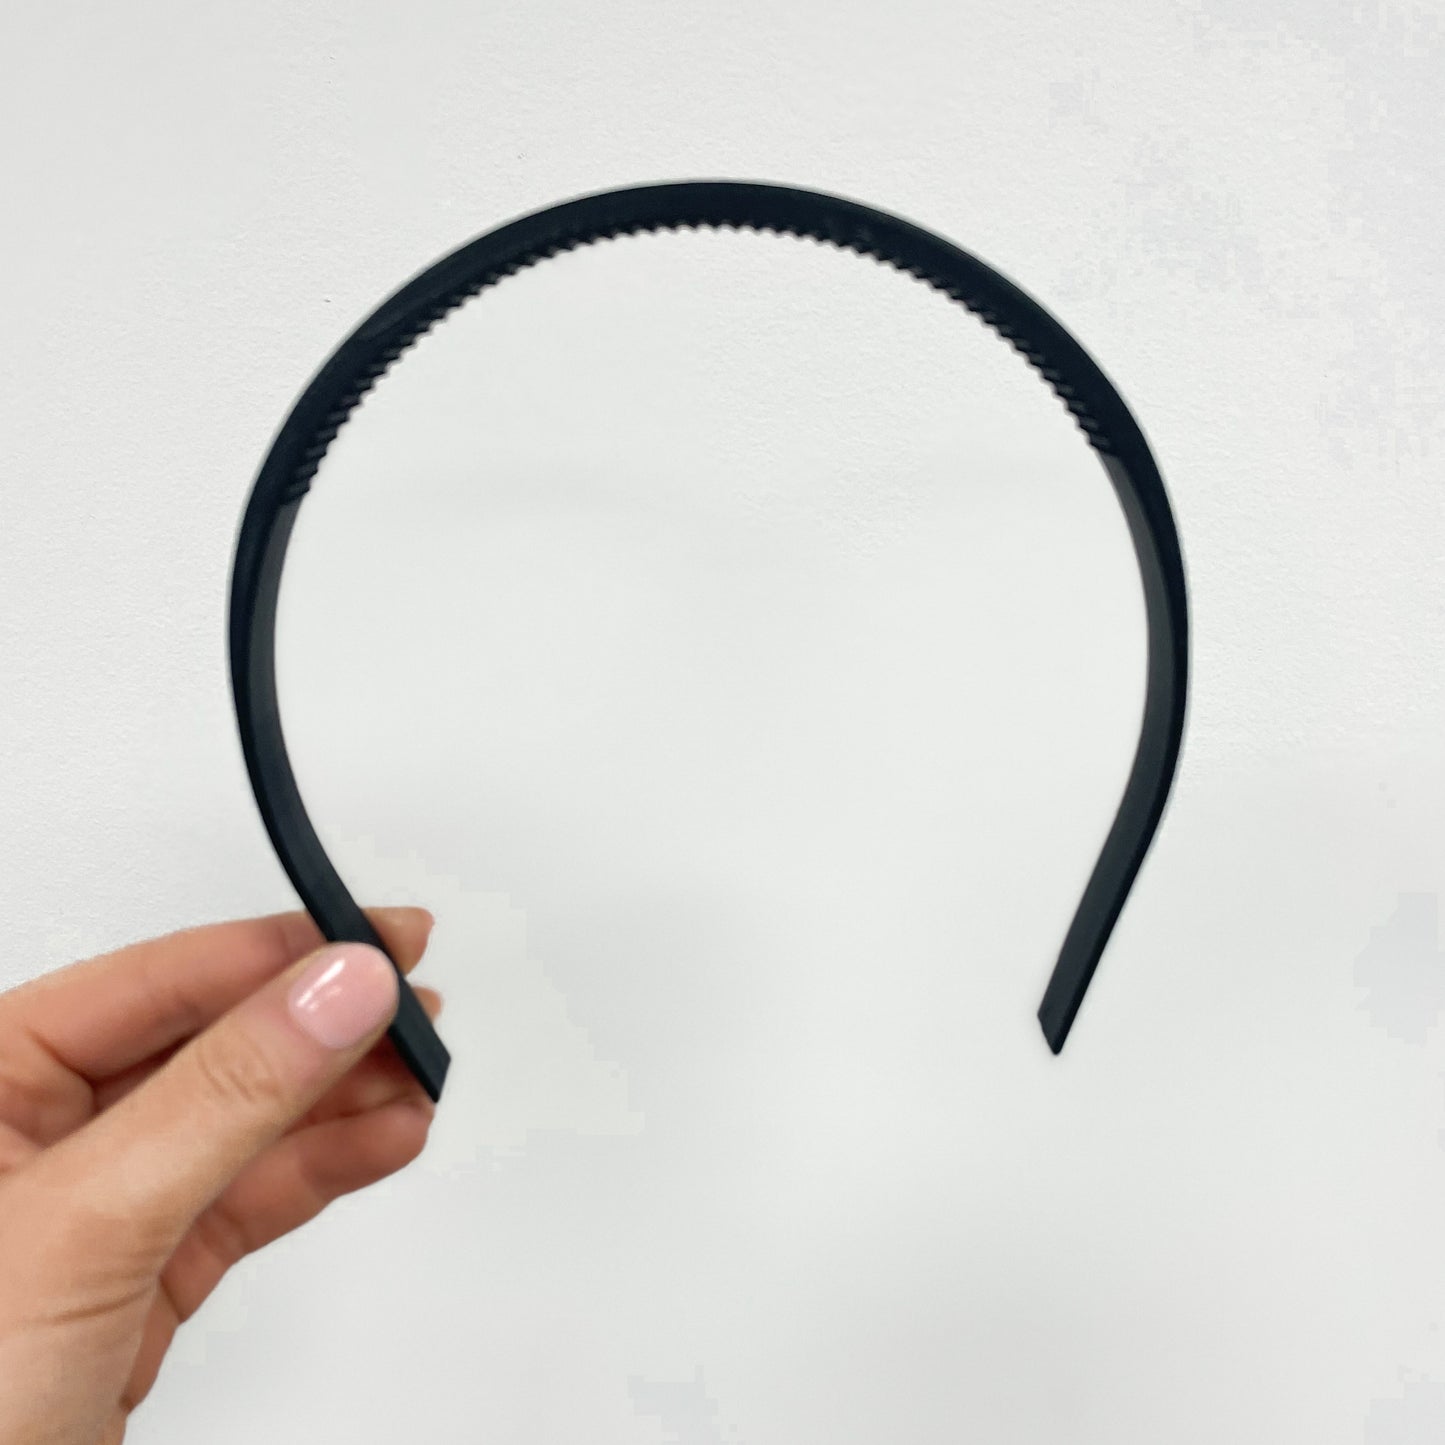 Thick Headband (Best for Motorized Ears)